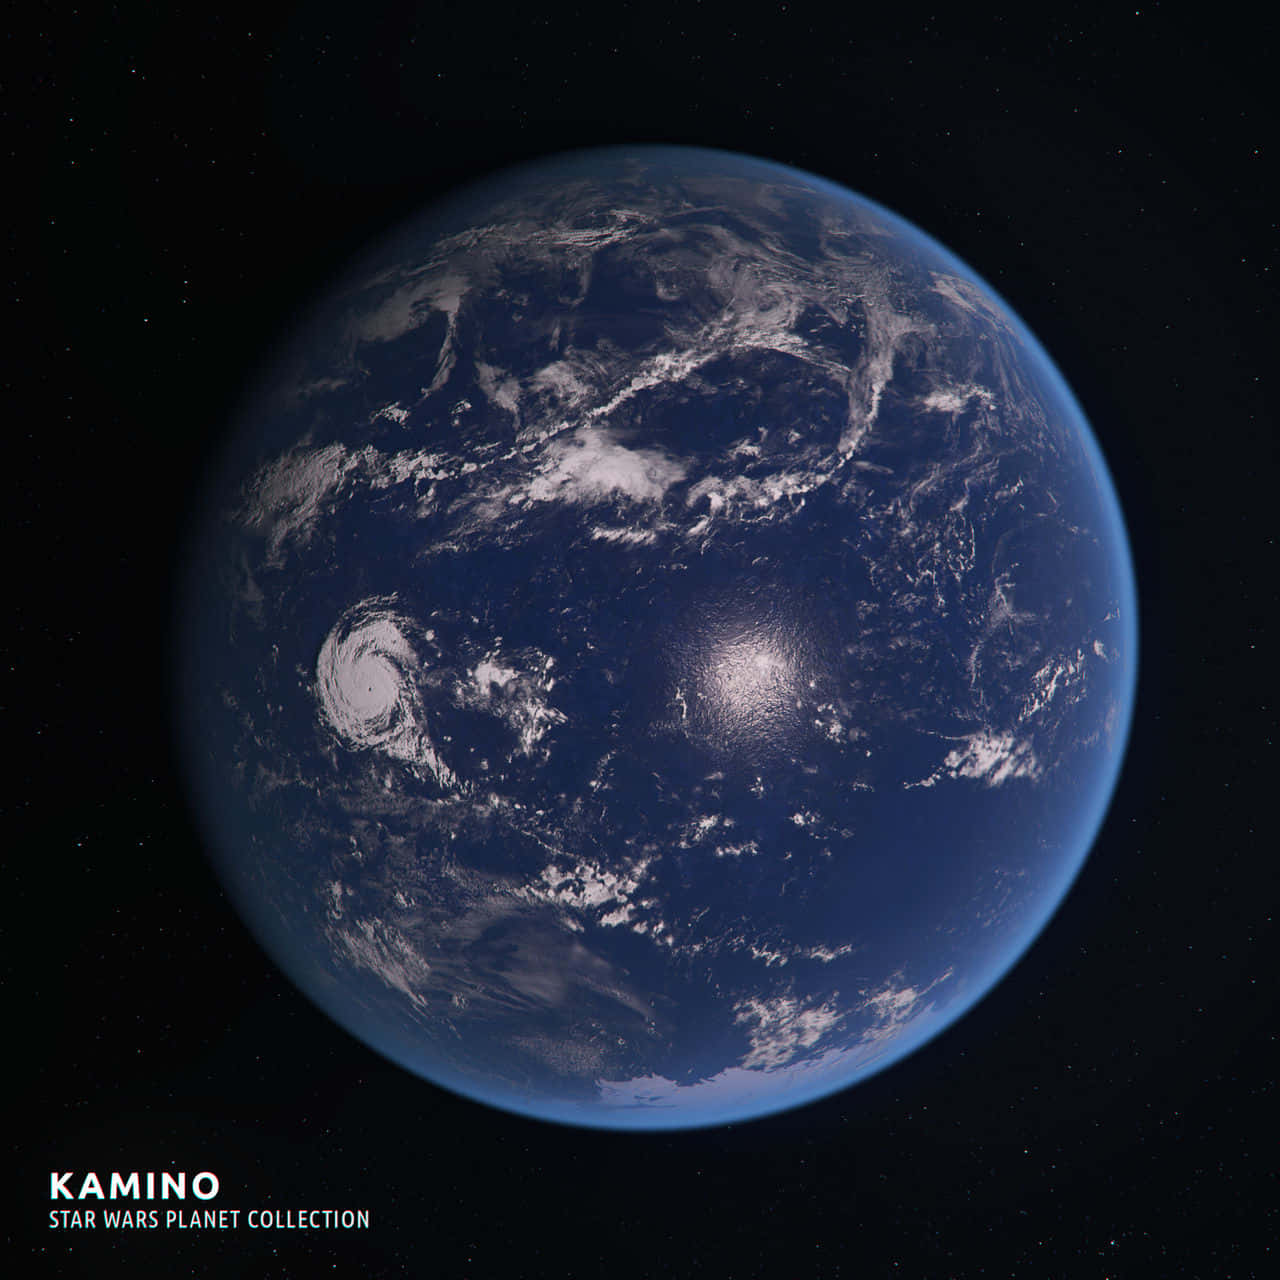 A Breathtaking View of the Stormy Kamino Planet Wallpaper